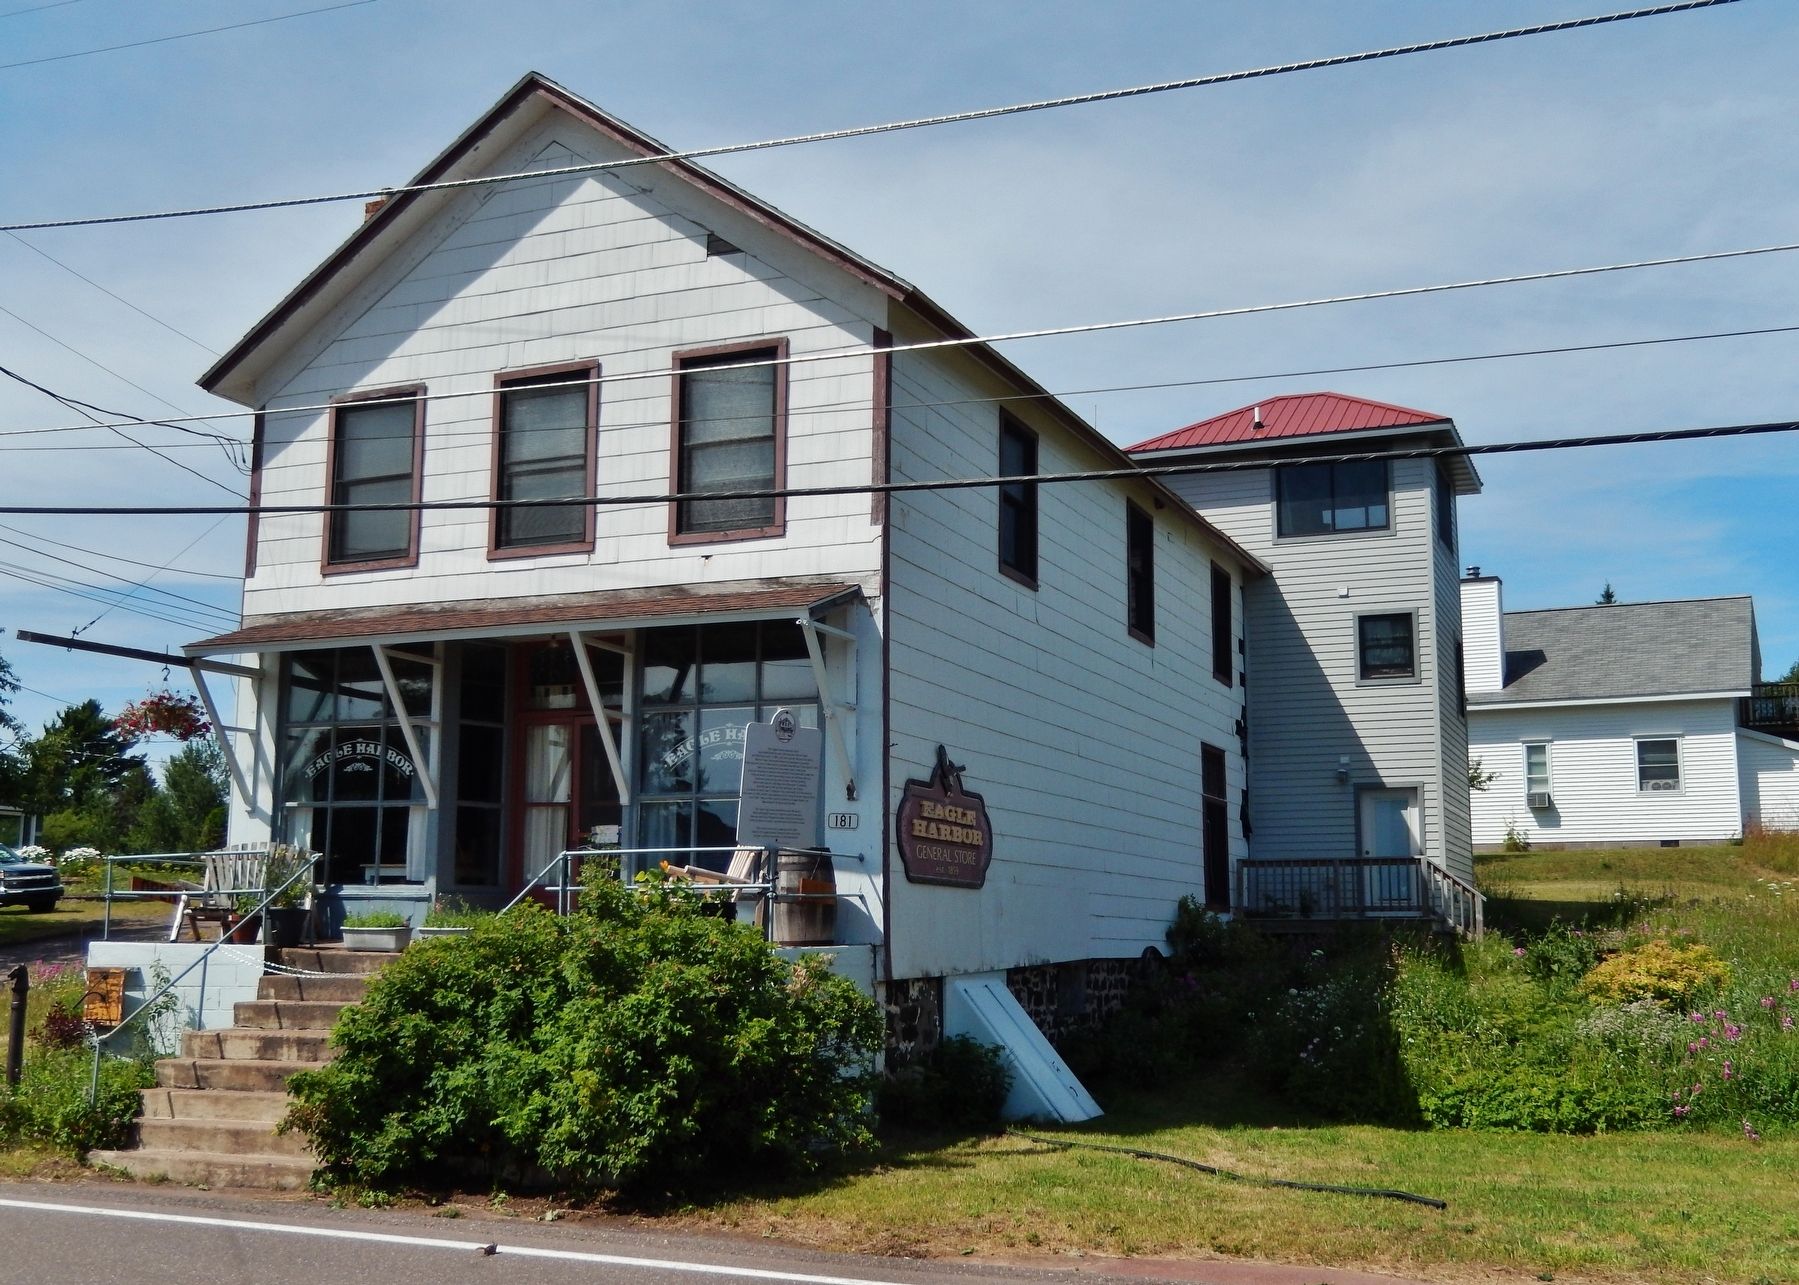 Eagle Harbor General Store image. Click for full size.